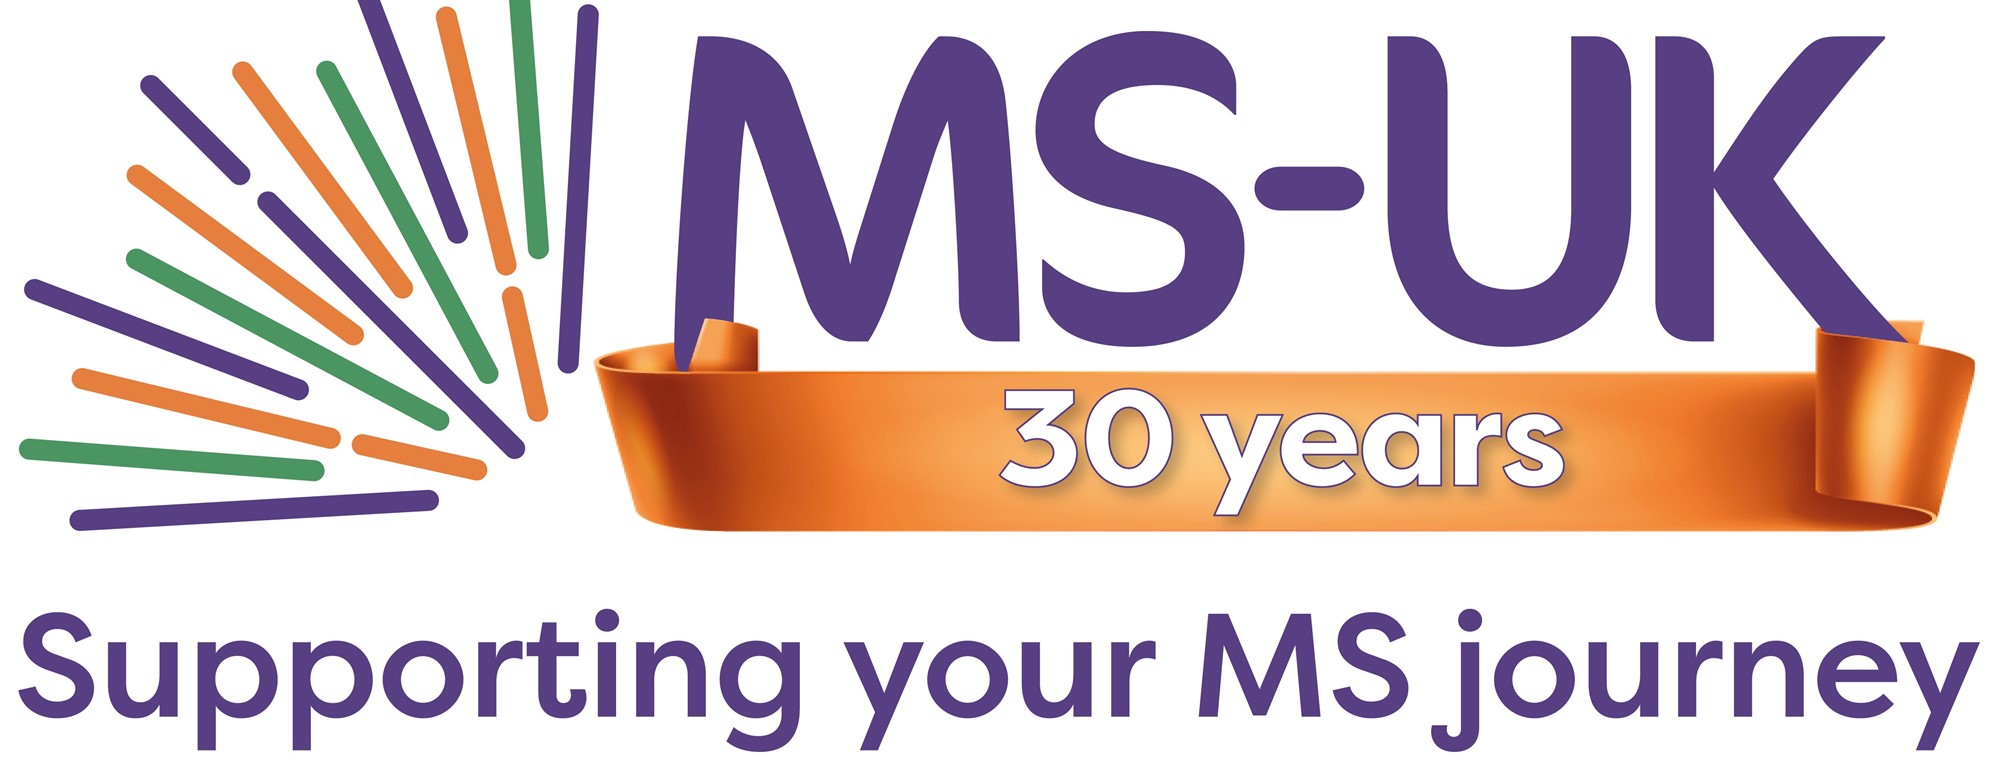 Antiques valuation day in aid of MS-UK